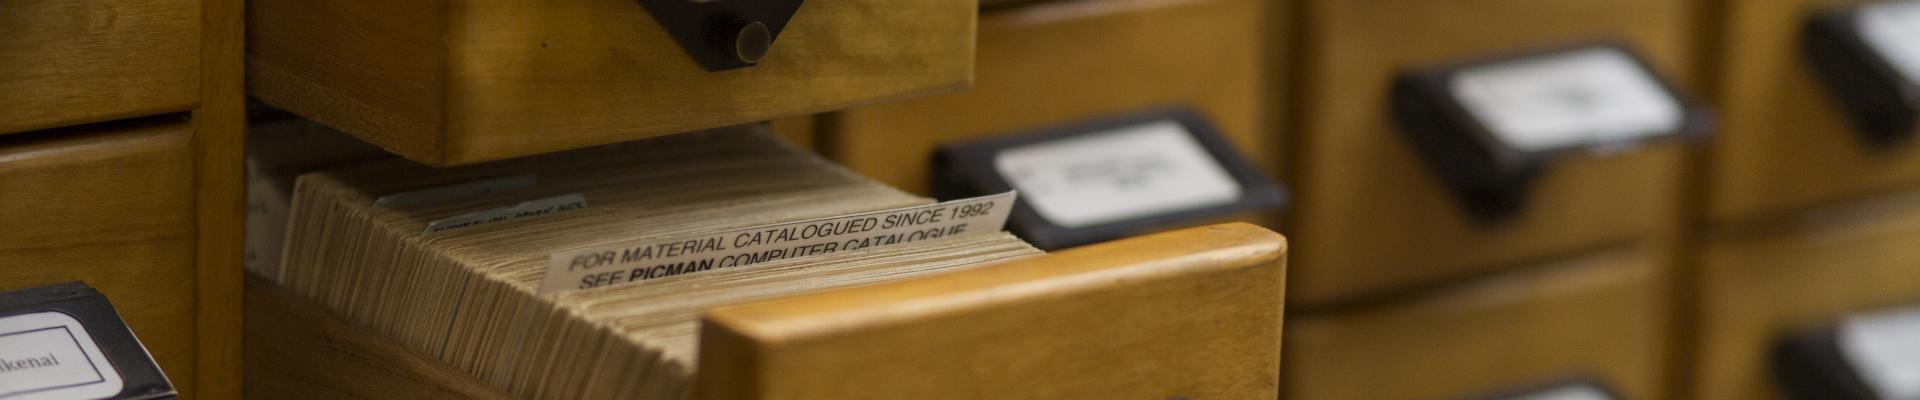 Card catalogues in Mitchell Reading Room